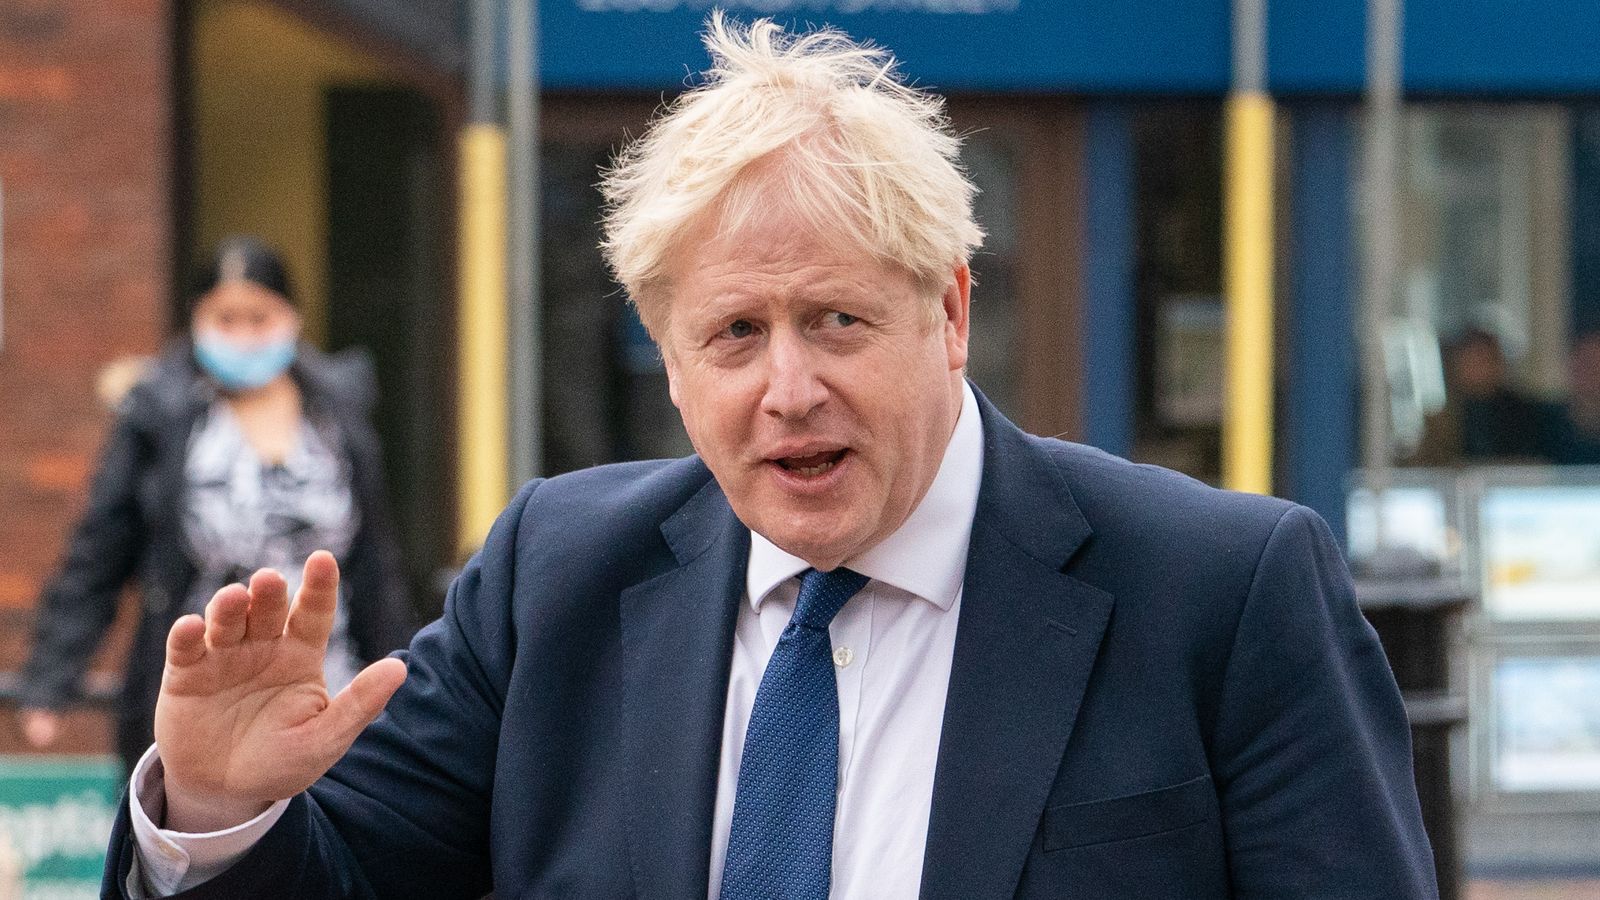 Boris Johnson questioned by Sue Gray as part of investigation into partygate allegations - report